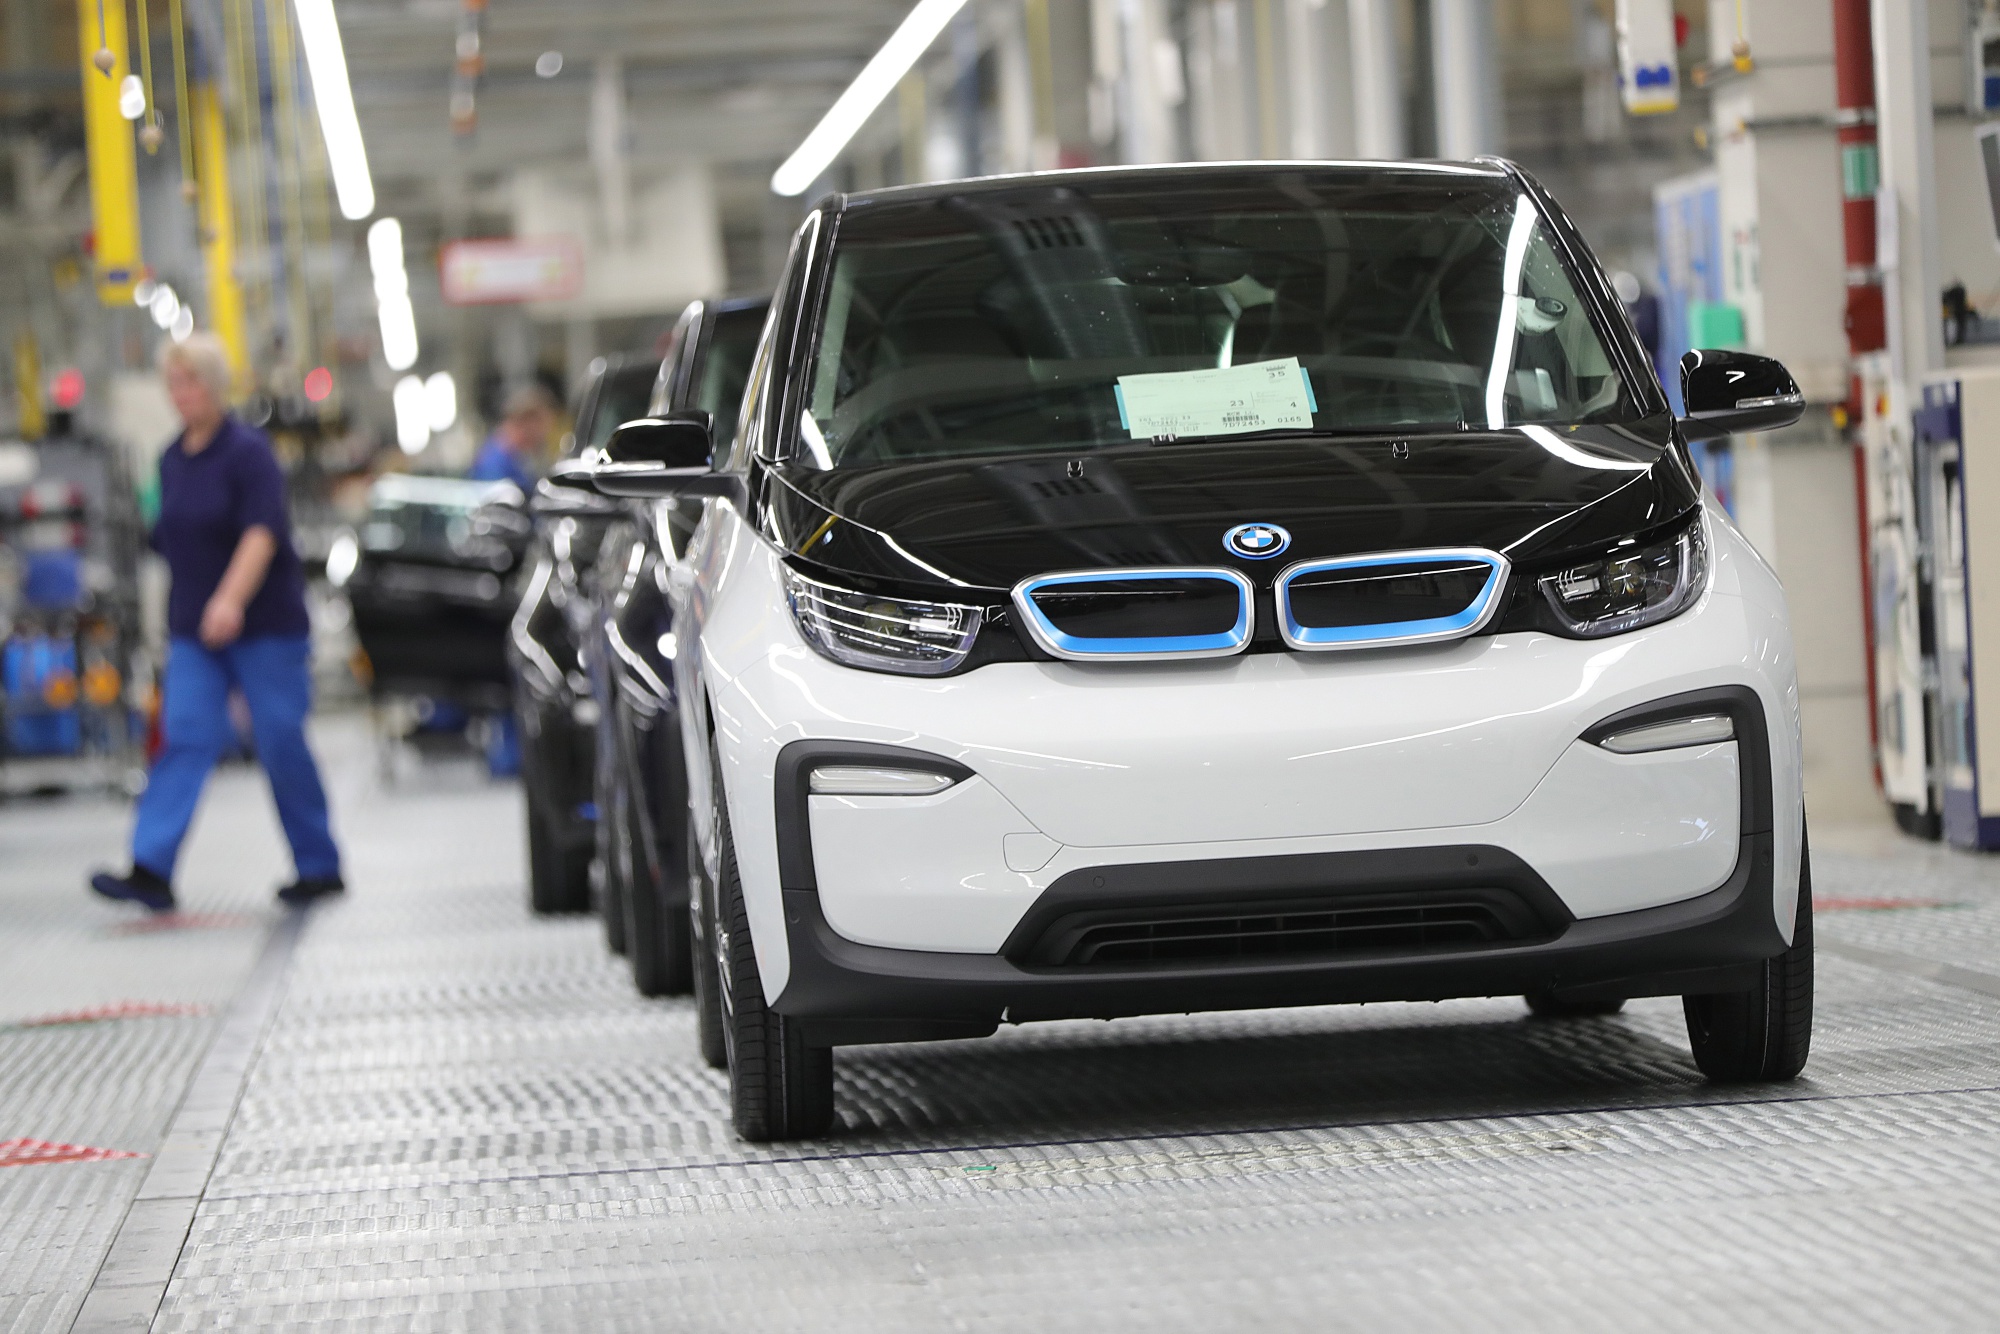 Newly assembled BMW i3 EVs roll off the assembly line.